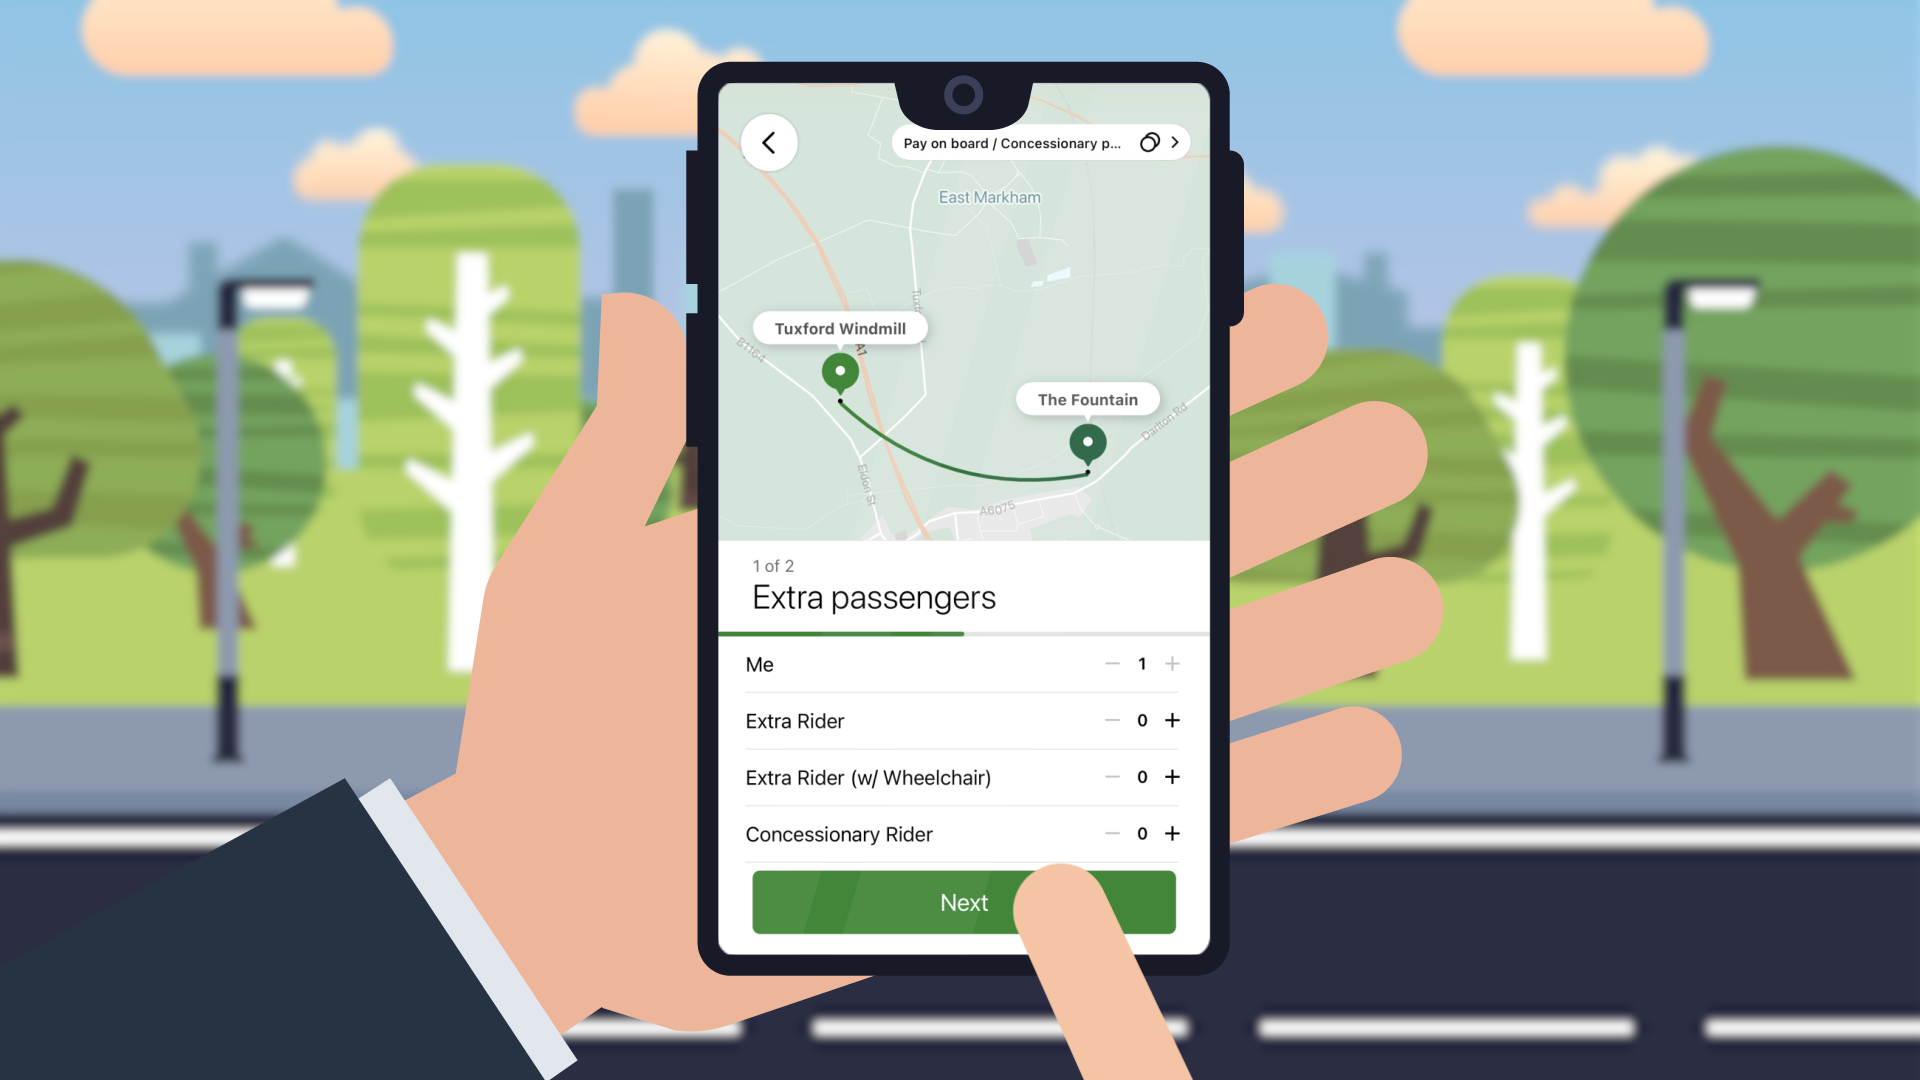 An image from the animation, showing the Nottsbus app running on a mobile device with trees in the background